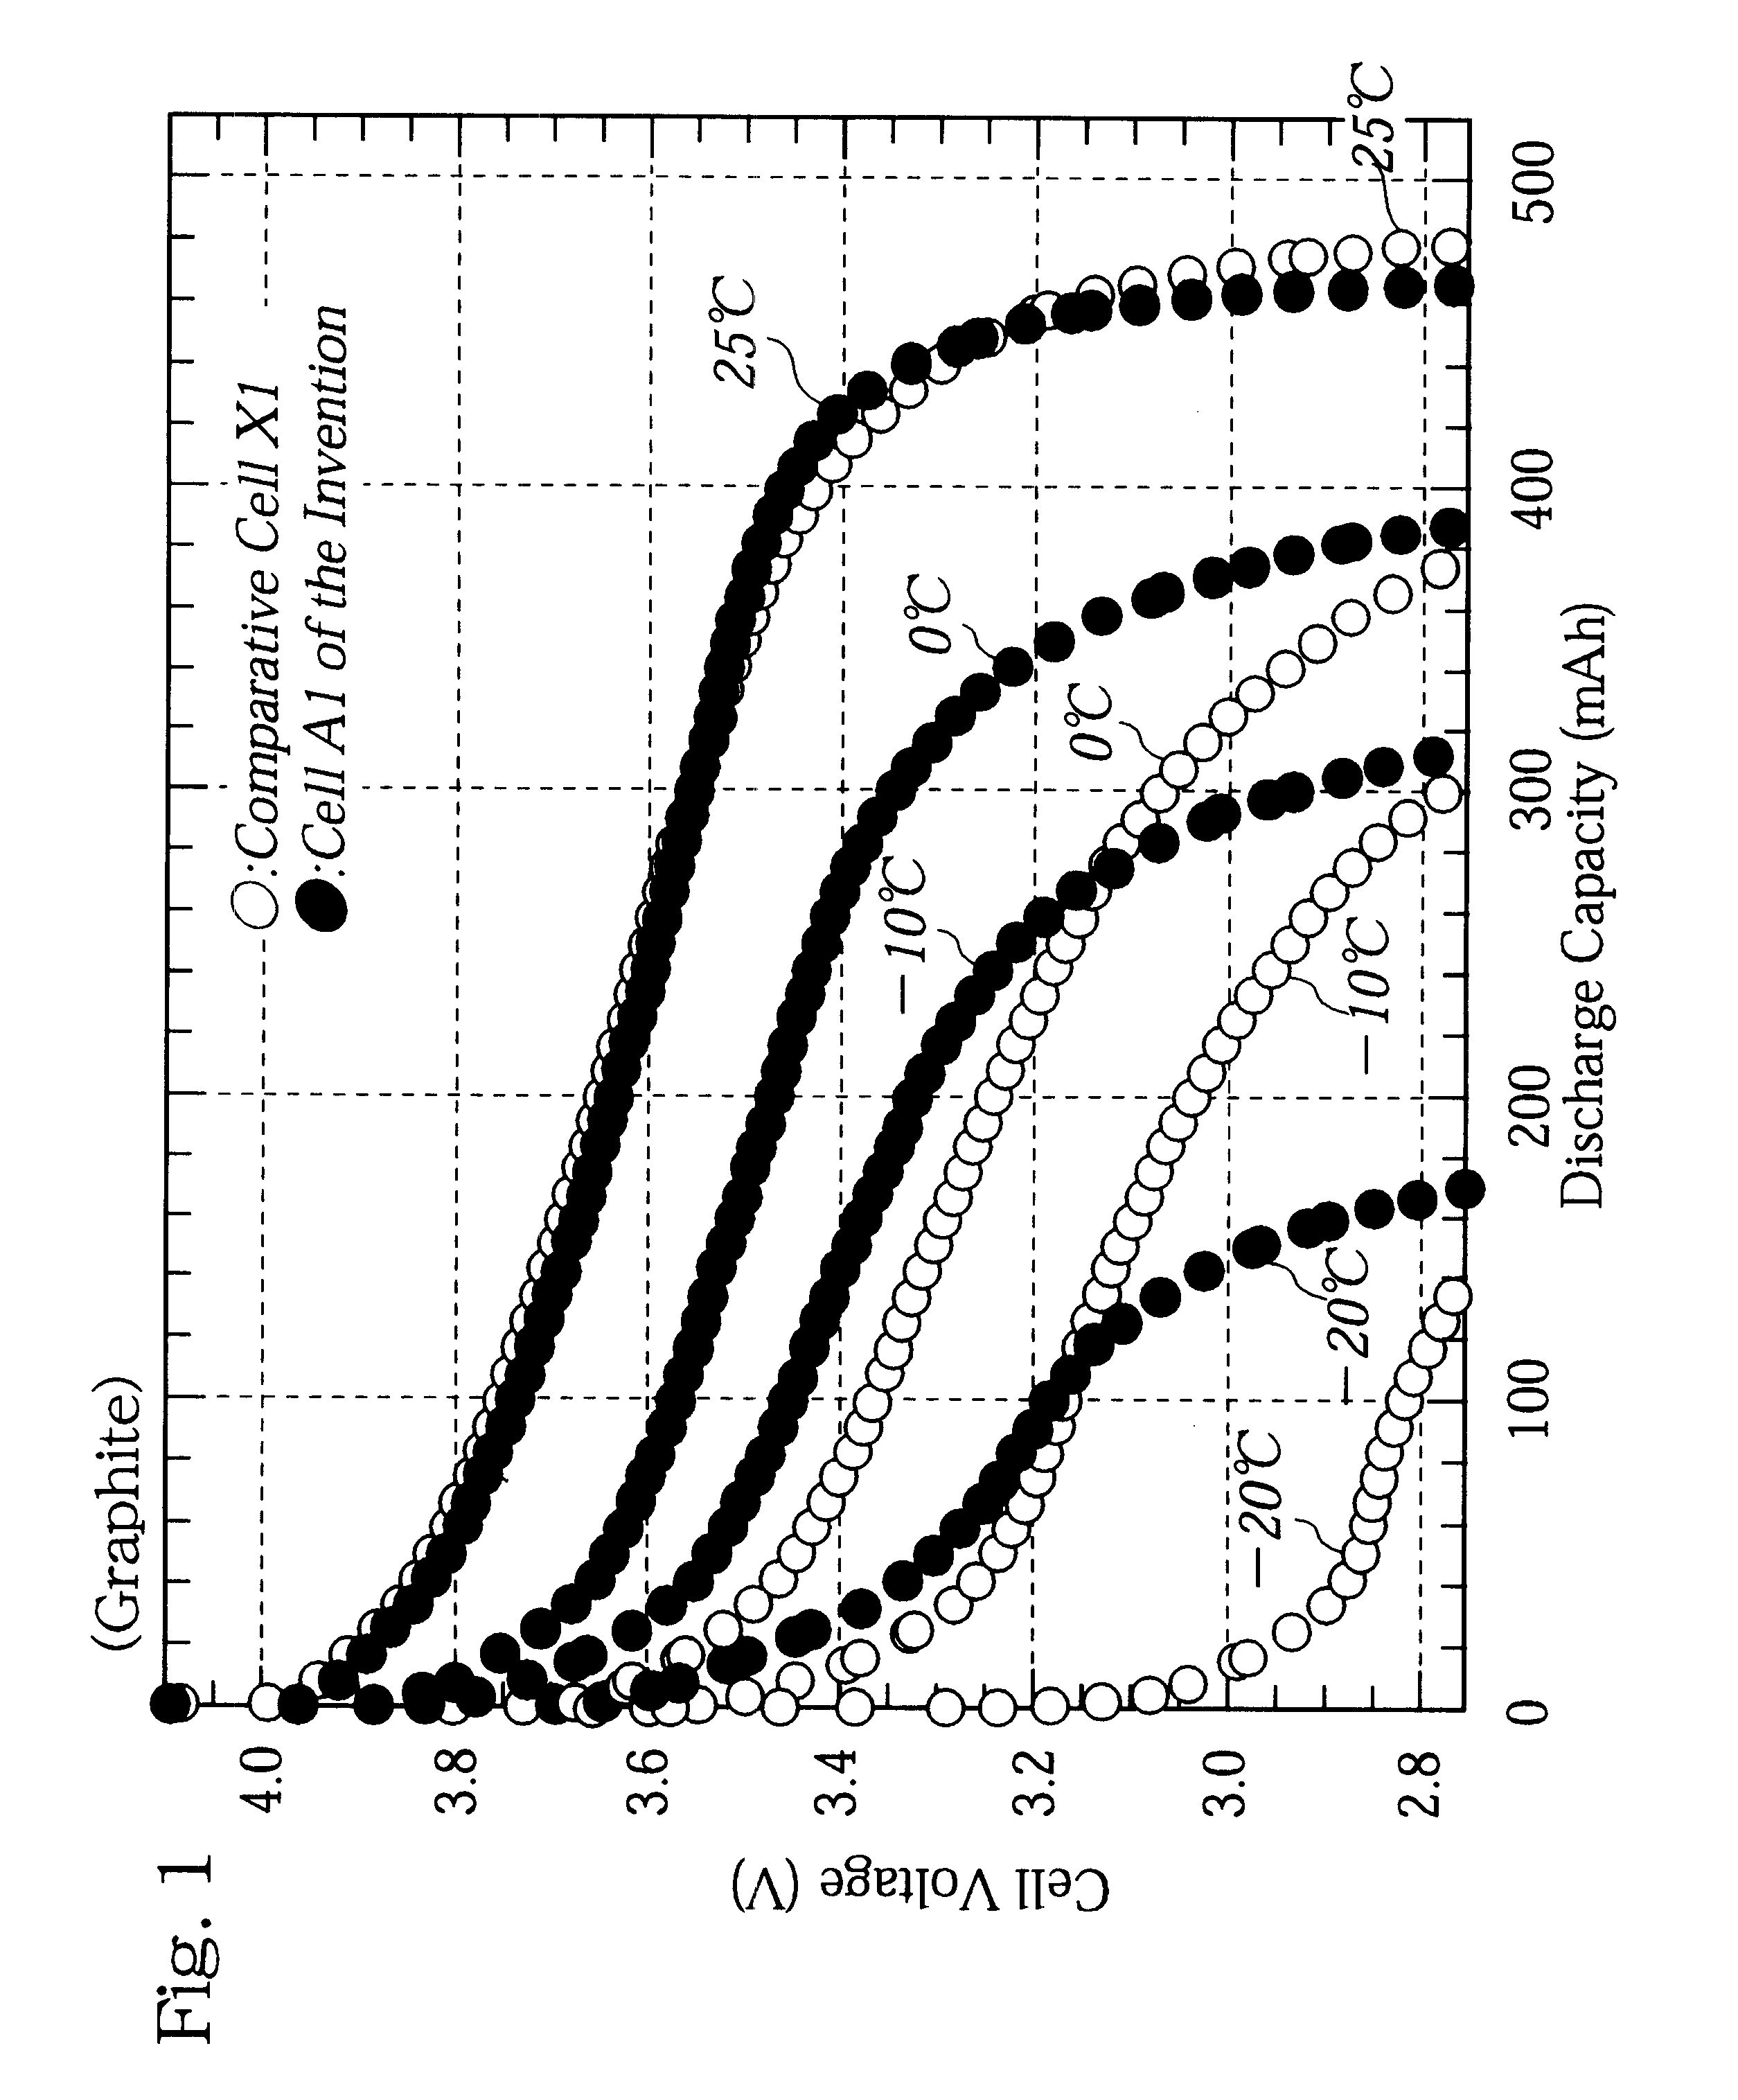 Non-aqueous electrolyte cell having a positive electrode with Ti-attached LiCoO2